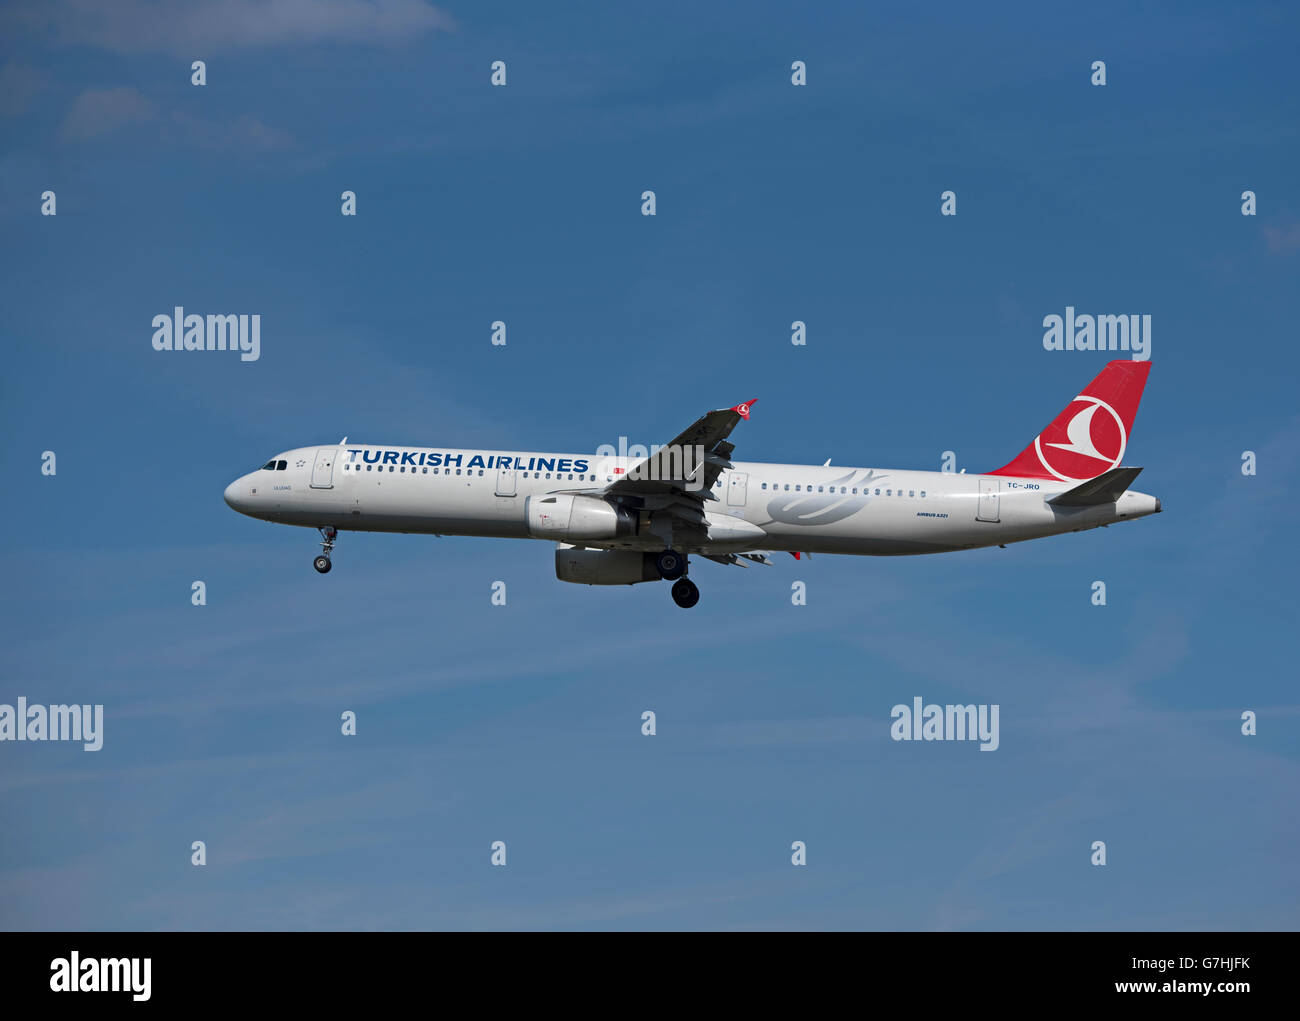 Turkish Airlines Airbus 321-231 (Uludag) about to land at London Heathrow Airport.  SCO 10,384. Stock Photo